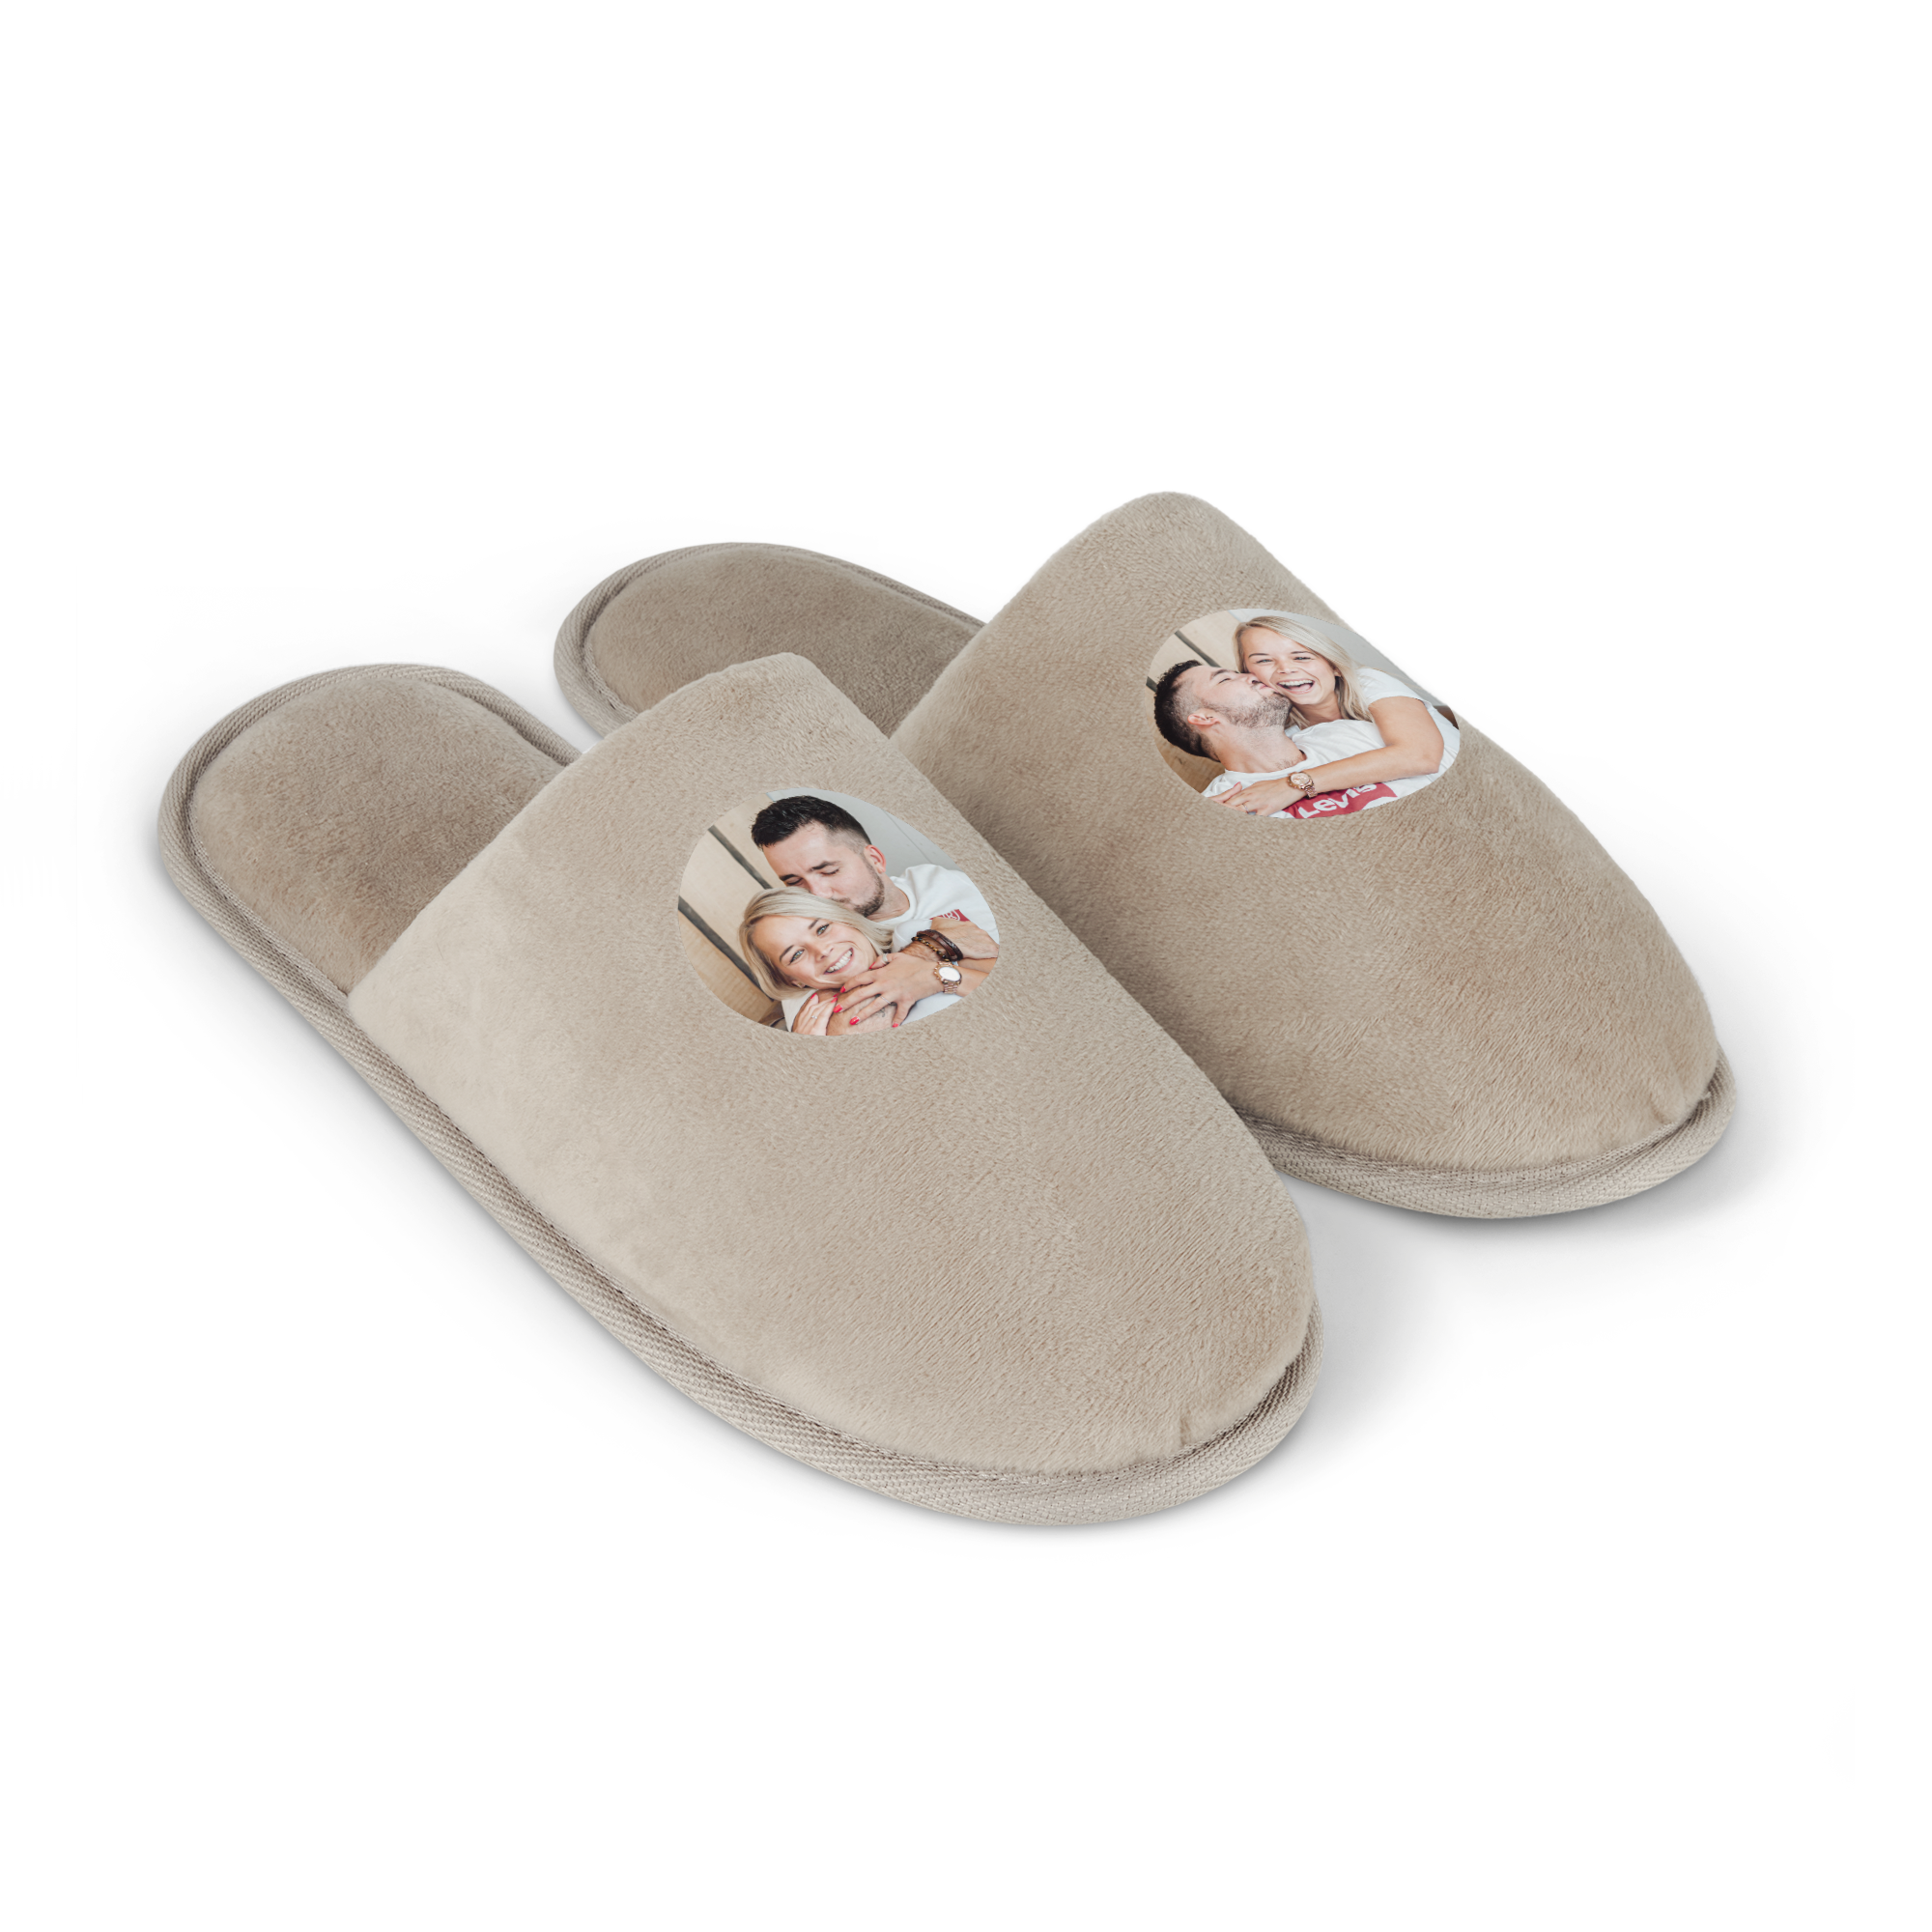 Personalised slippers - Beige - Size 43 - 45